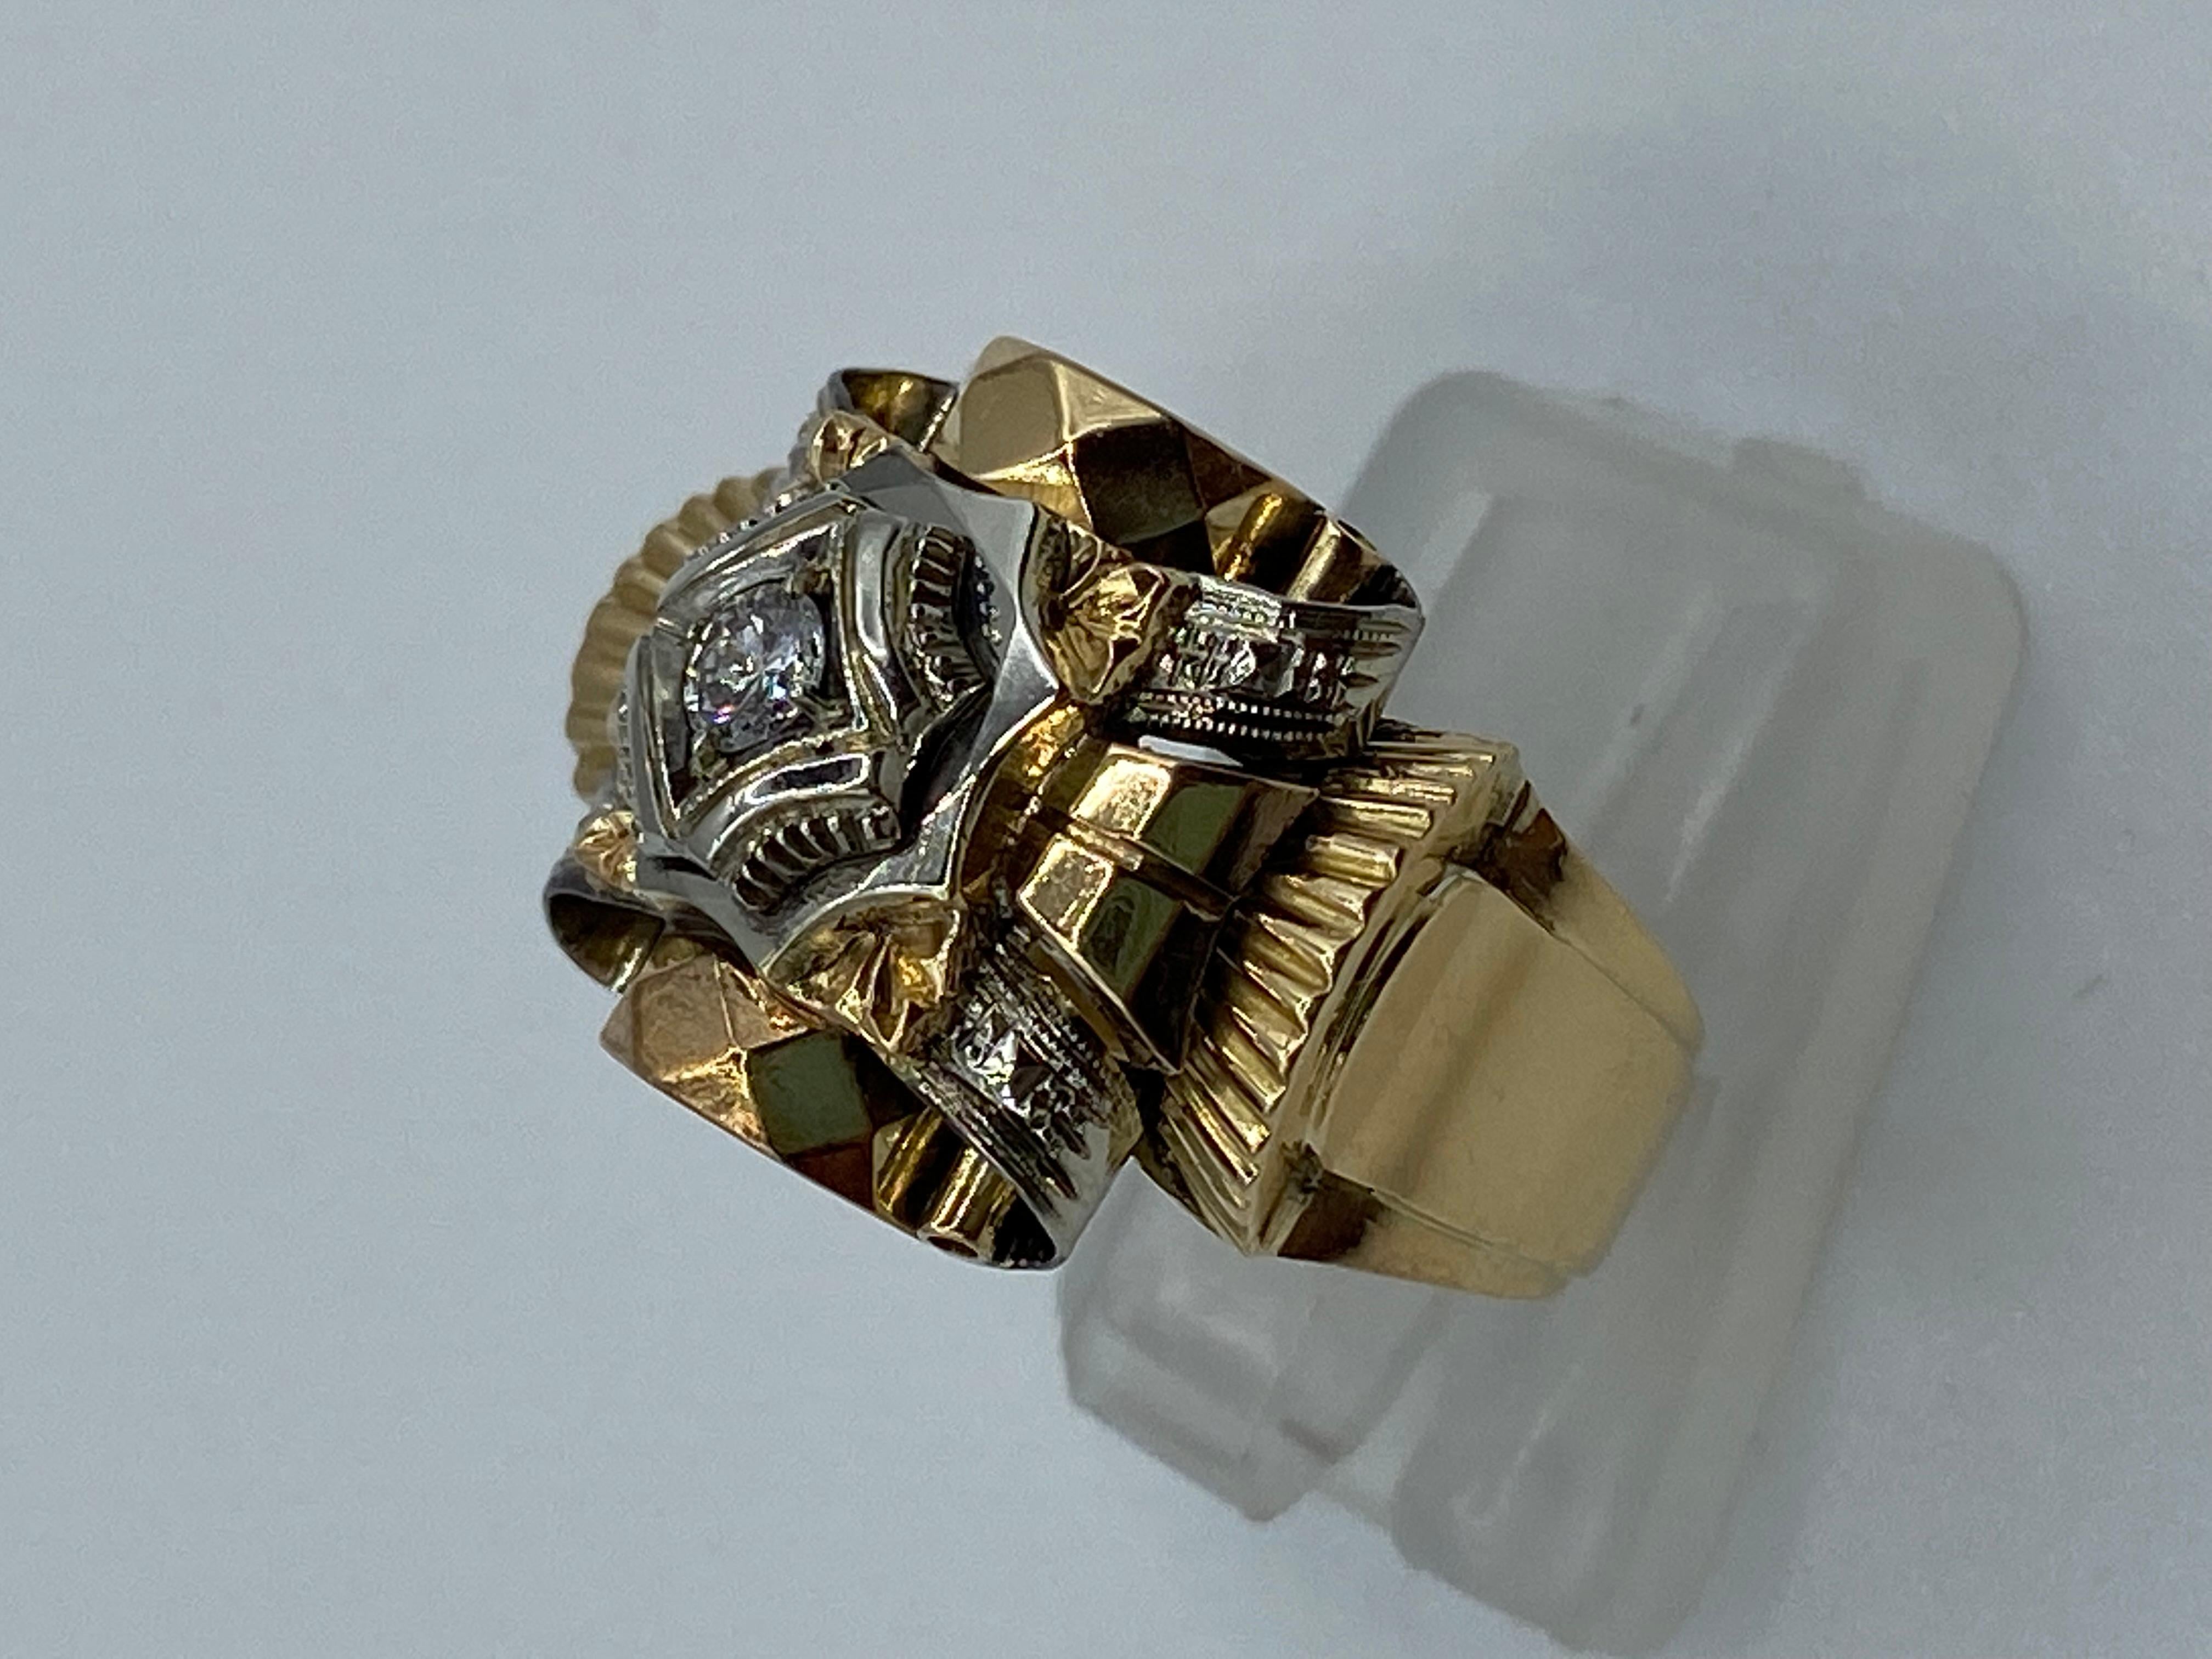 Barocco ring in 18 kt gold and brilliant cut diamond 0.10 ct, three-tone gold. It dates back to the 1950s, a very valuable manufacture typical of the time.Considering its seventy years it is in excellent condition, although it shows signs of age.